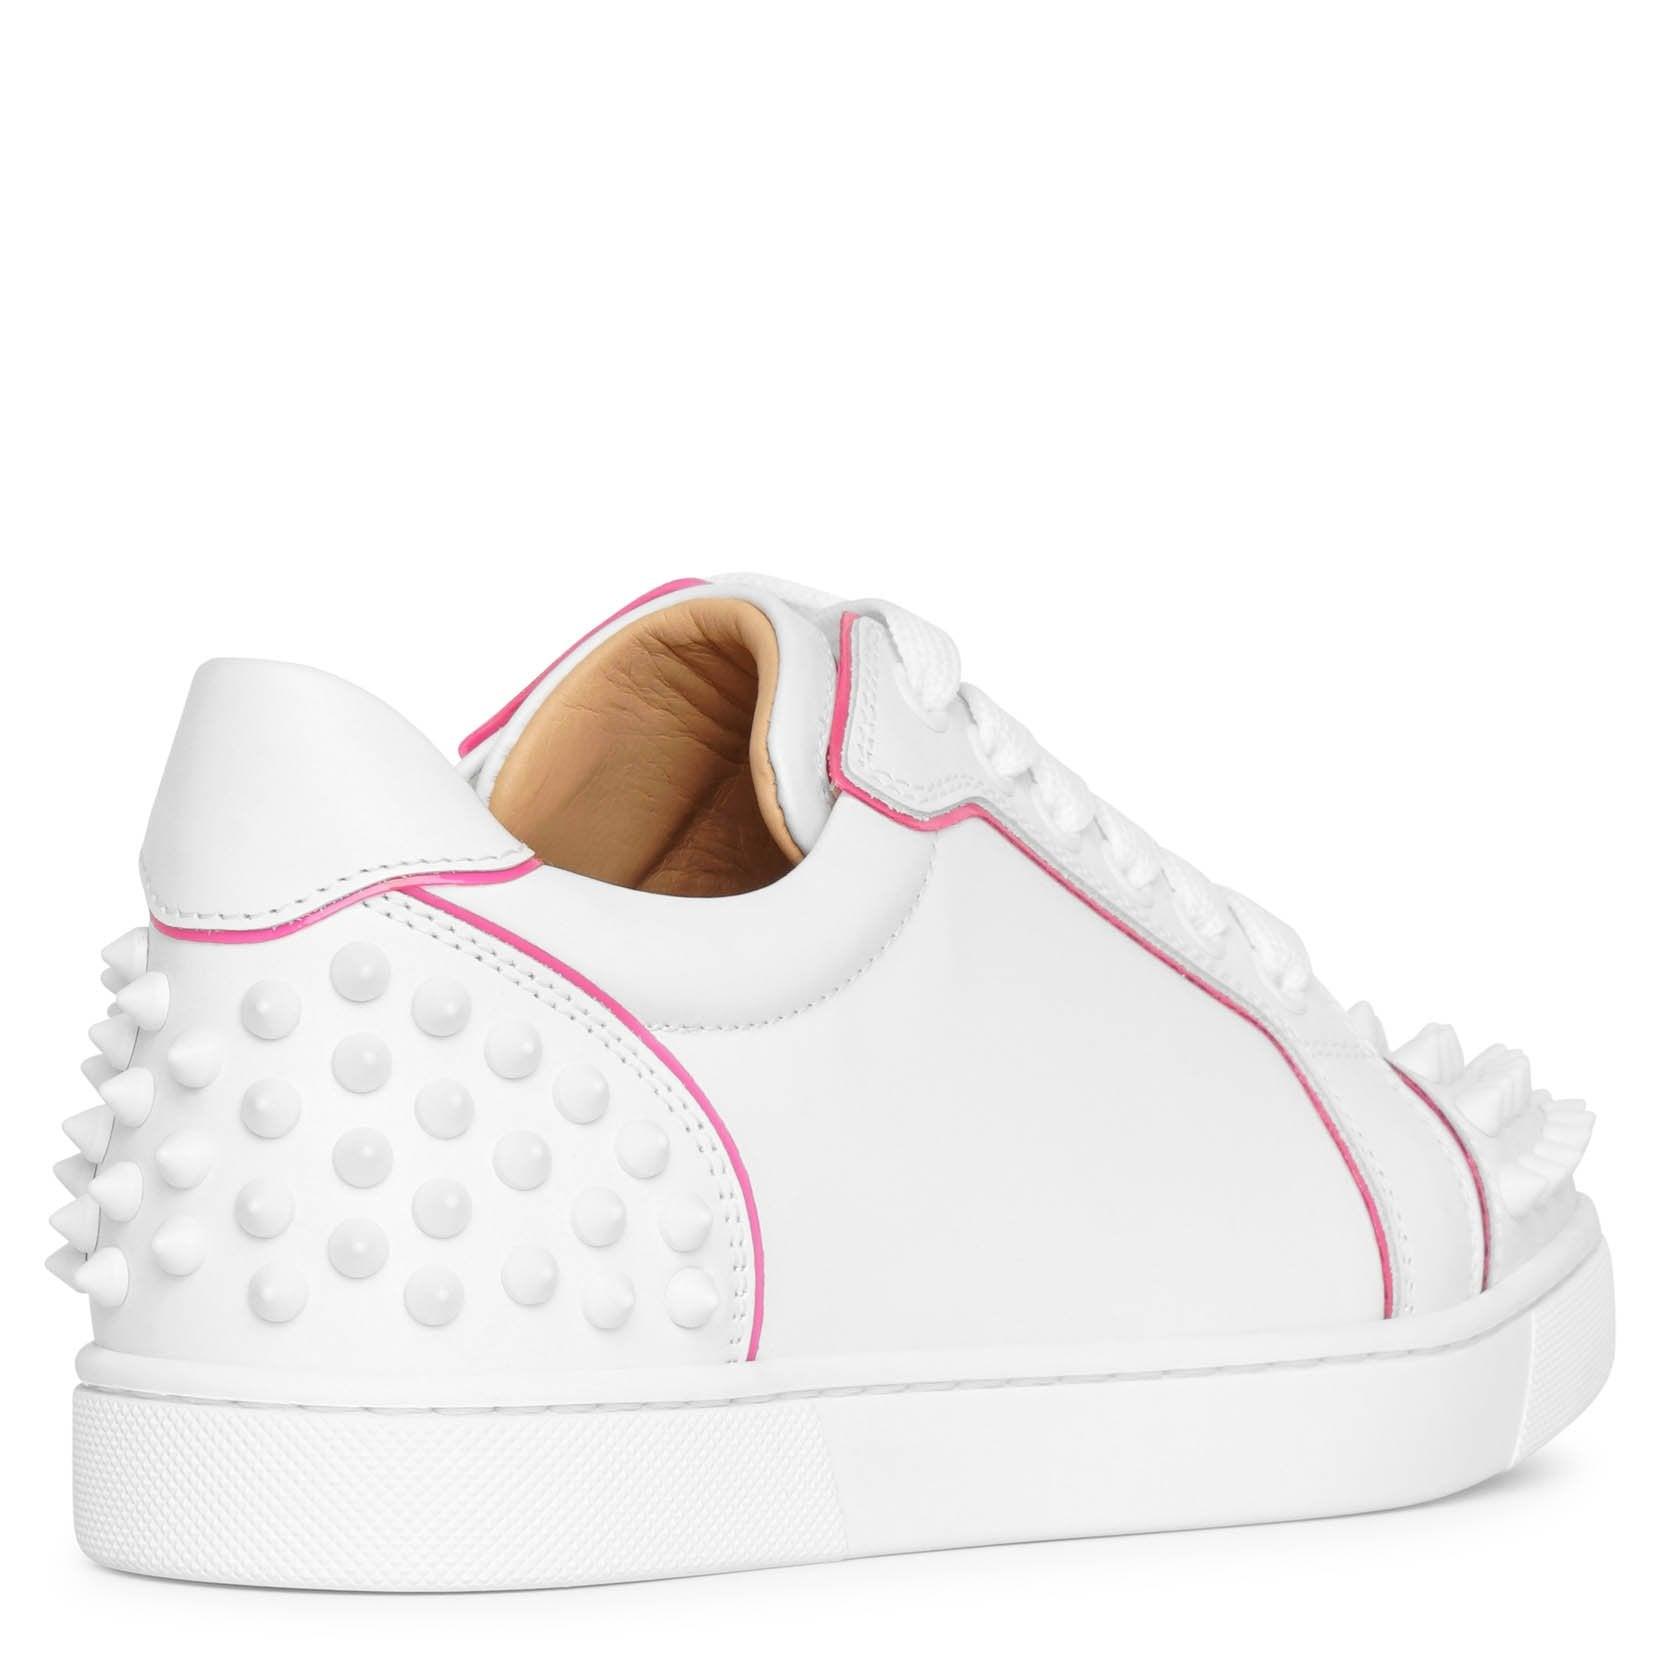 Christian Louboutin Vieira 2 Leather Sneakers in Pink - Lyst